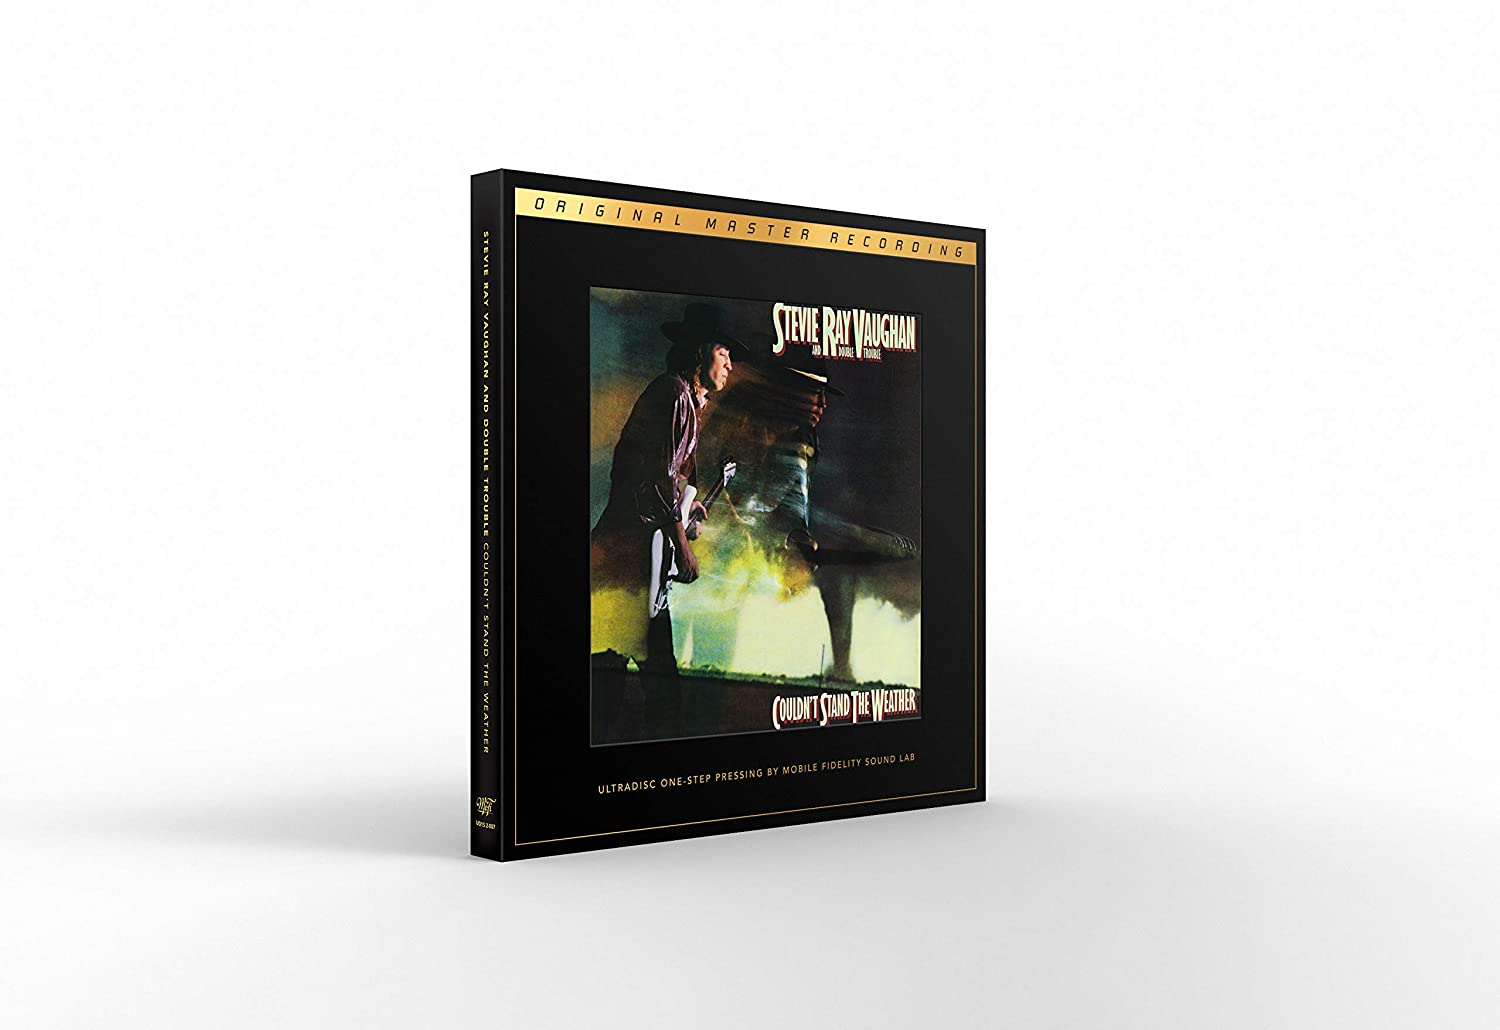 Stevie Ray Vaughan - Couldn't Stand the Weather [Limited Edition UltraDisc One-Step 45 RPM Vinyl 2LP Box Set] [LIMIT 1 PER CUSTOMER]